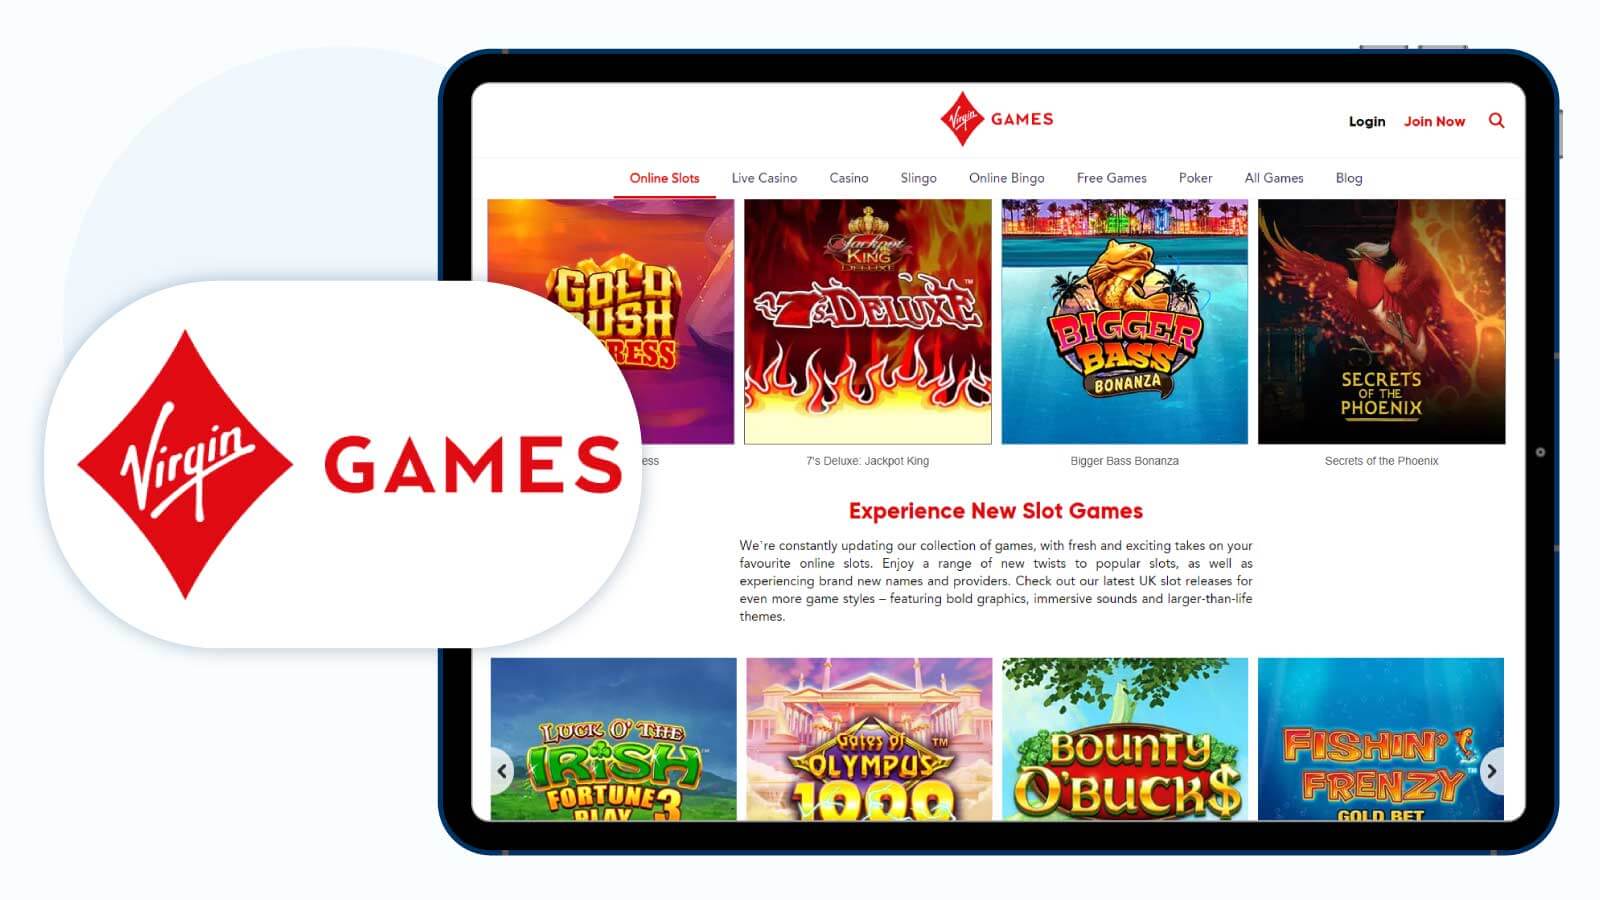 Virgin Games Casino – Outstanding Eyecon Casino with No Wagering Free Spins Offer